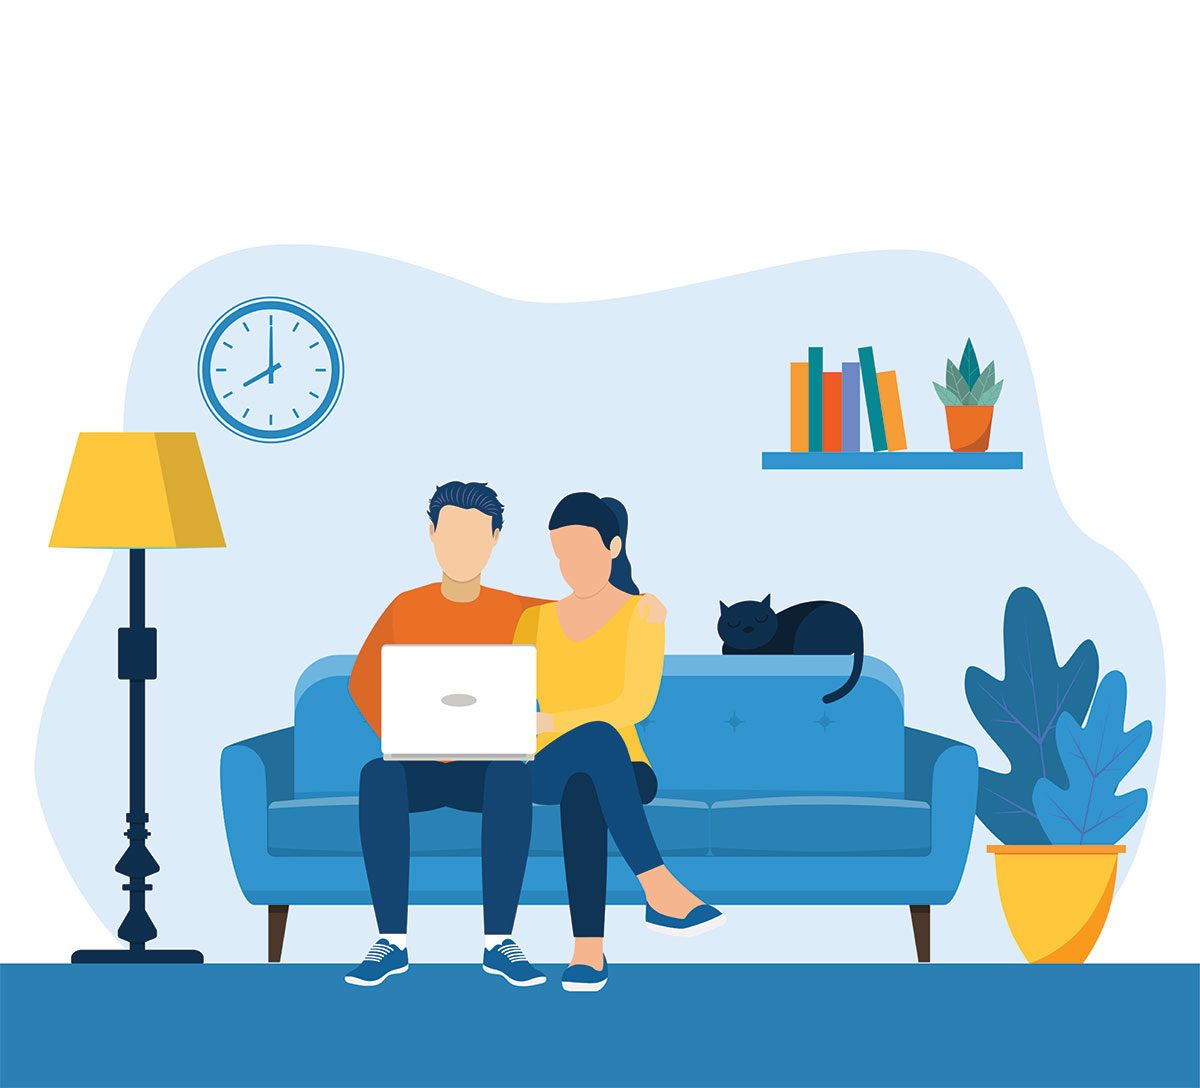 young couple using a laptop while sitting on a sofa. web page design template for online education, learning, video tutorials. Vector illustration in flat style